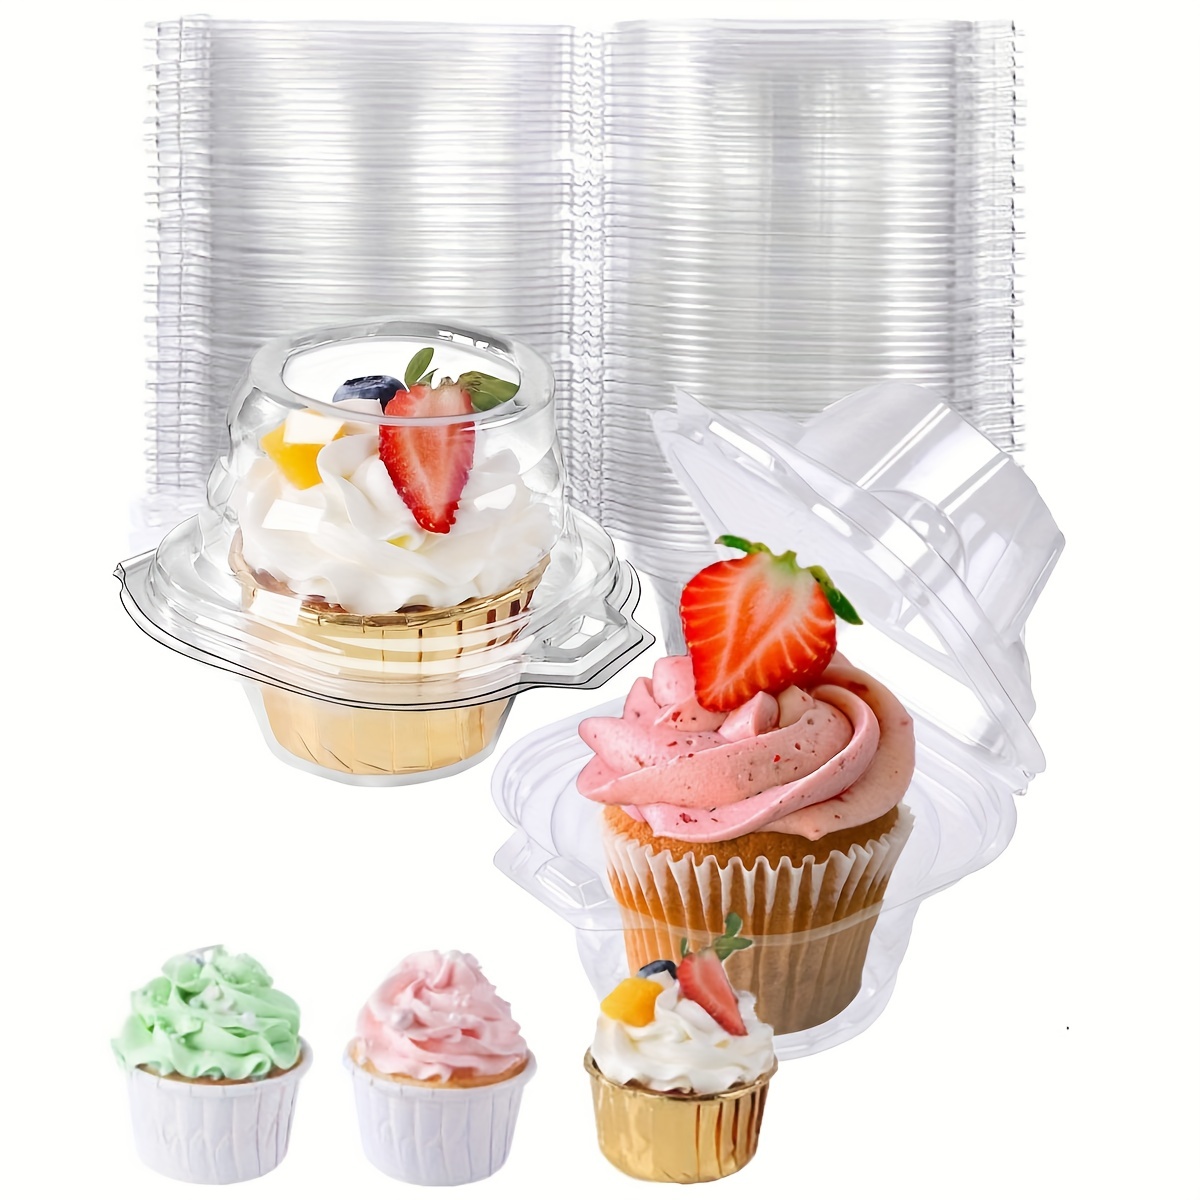 MT Products Single Plastic Cupcake Containers/Cupcake Holder - Pack of 15